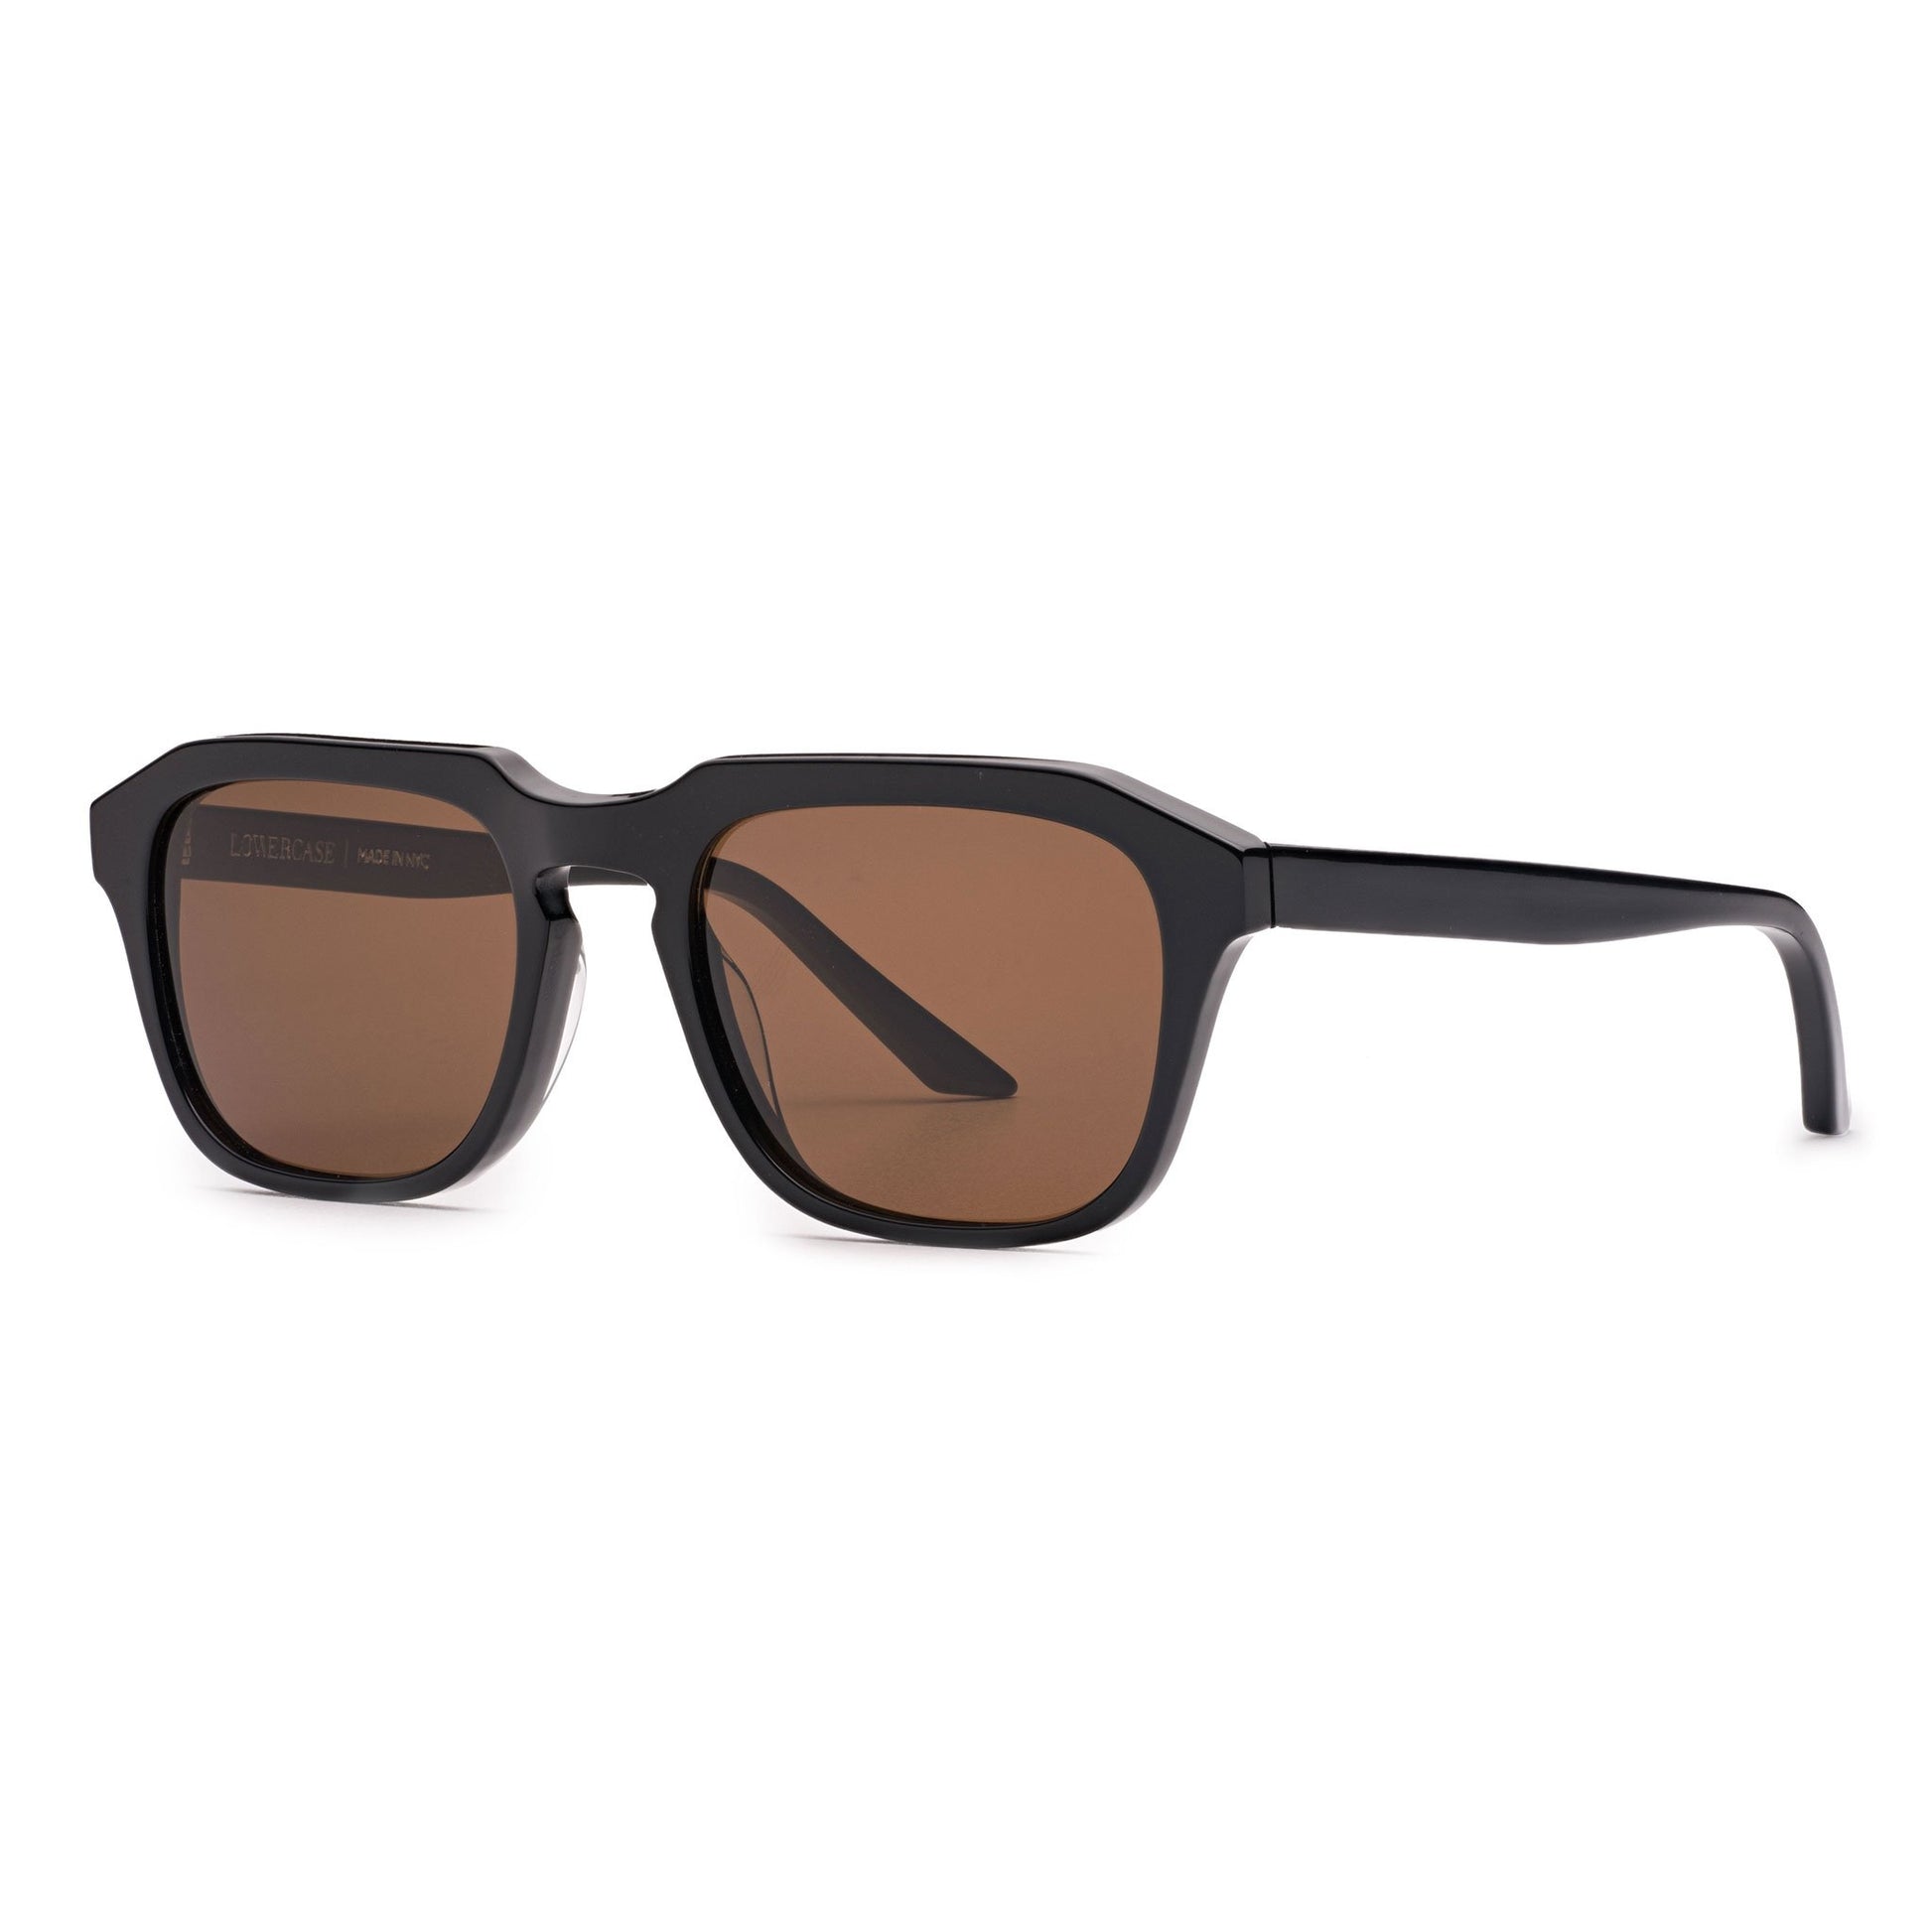 Lowercase NYC Clement Sunglasses Black